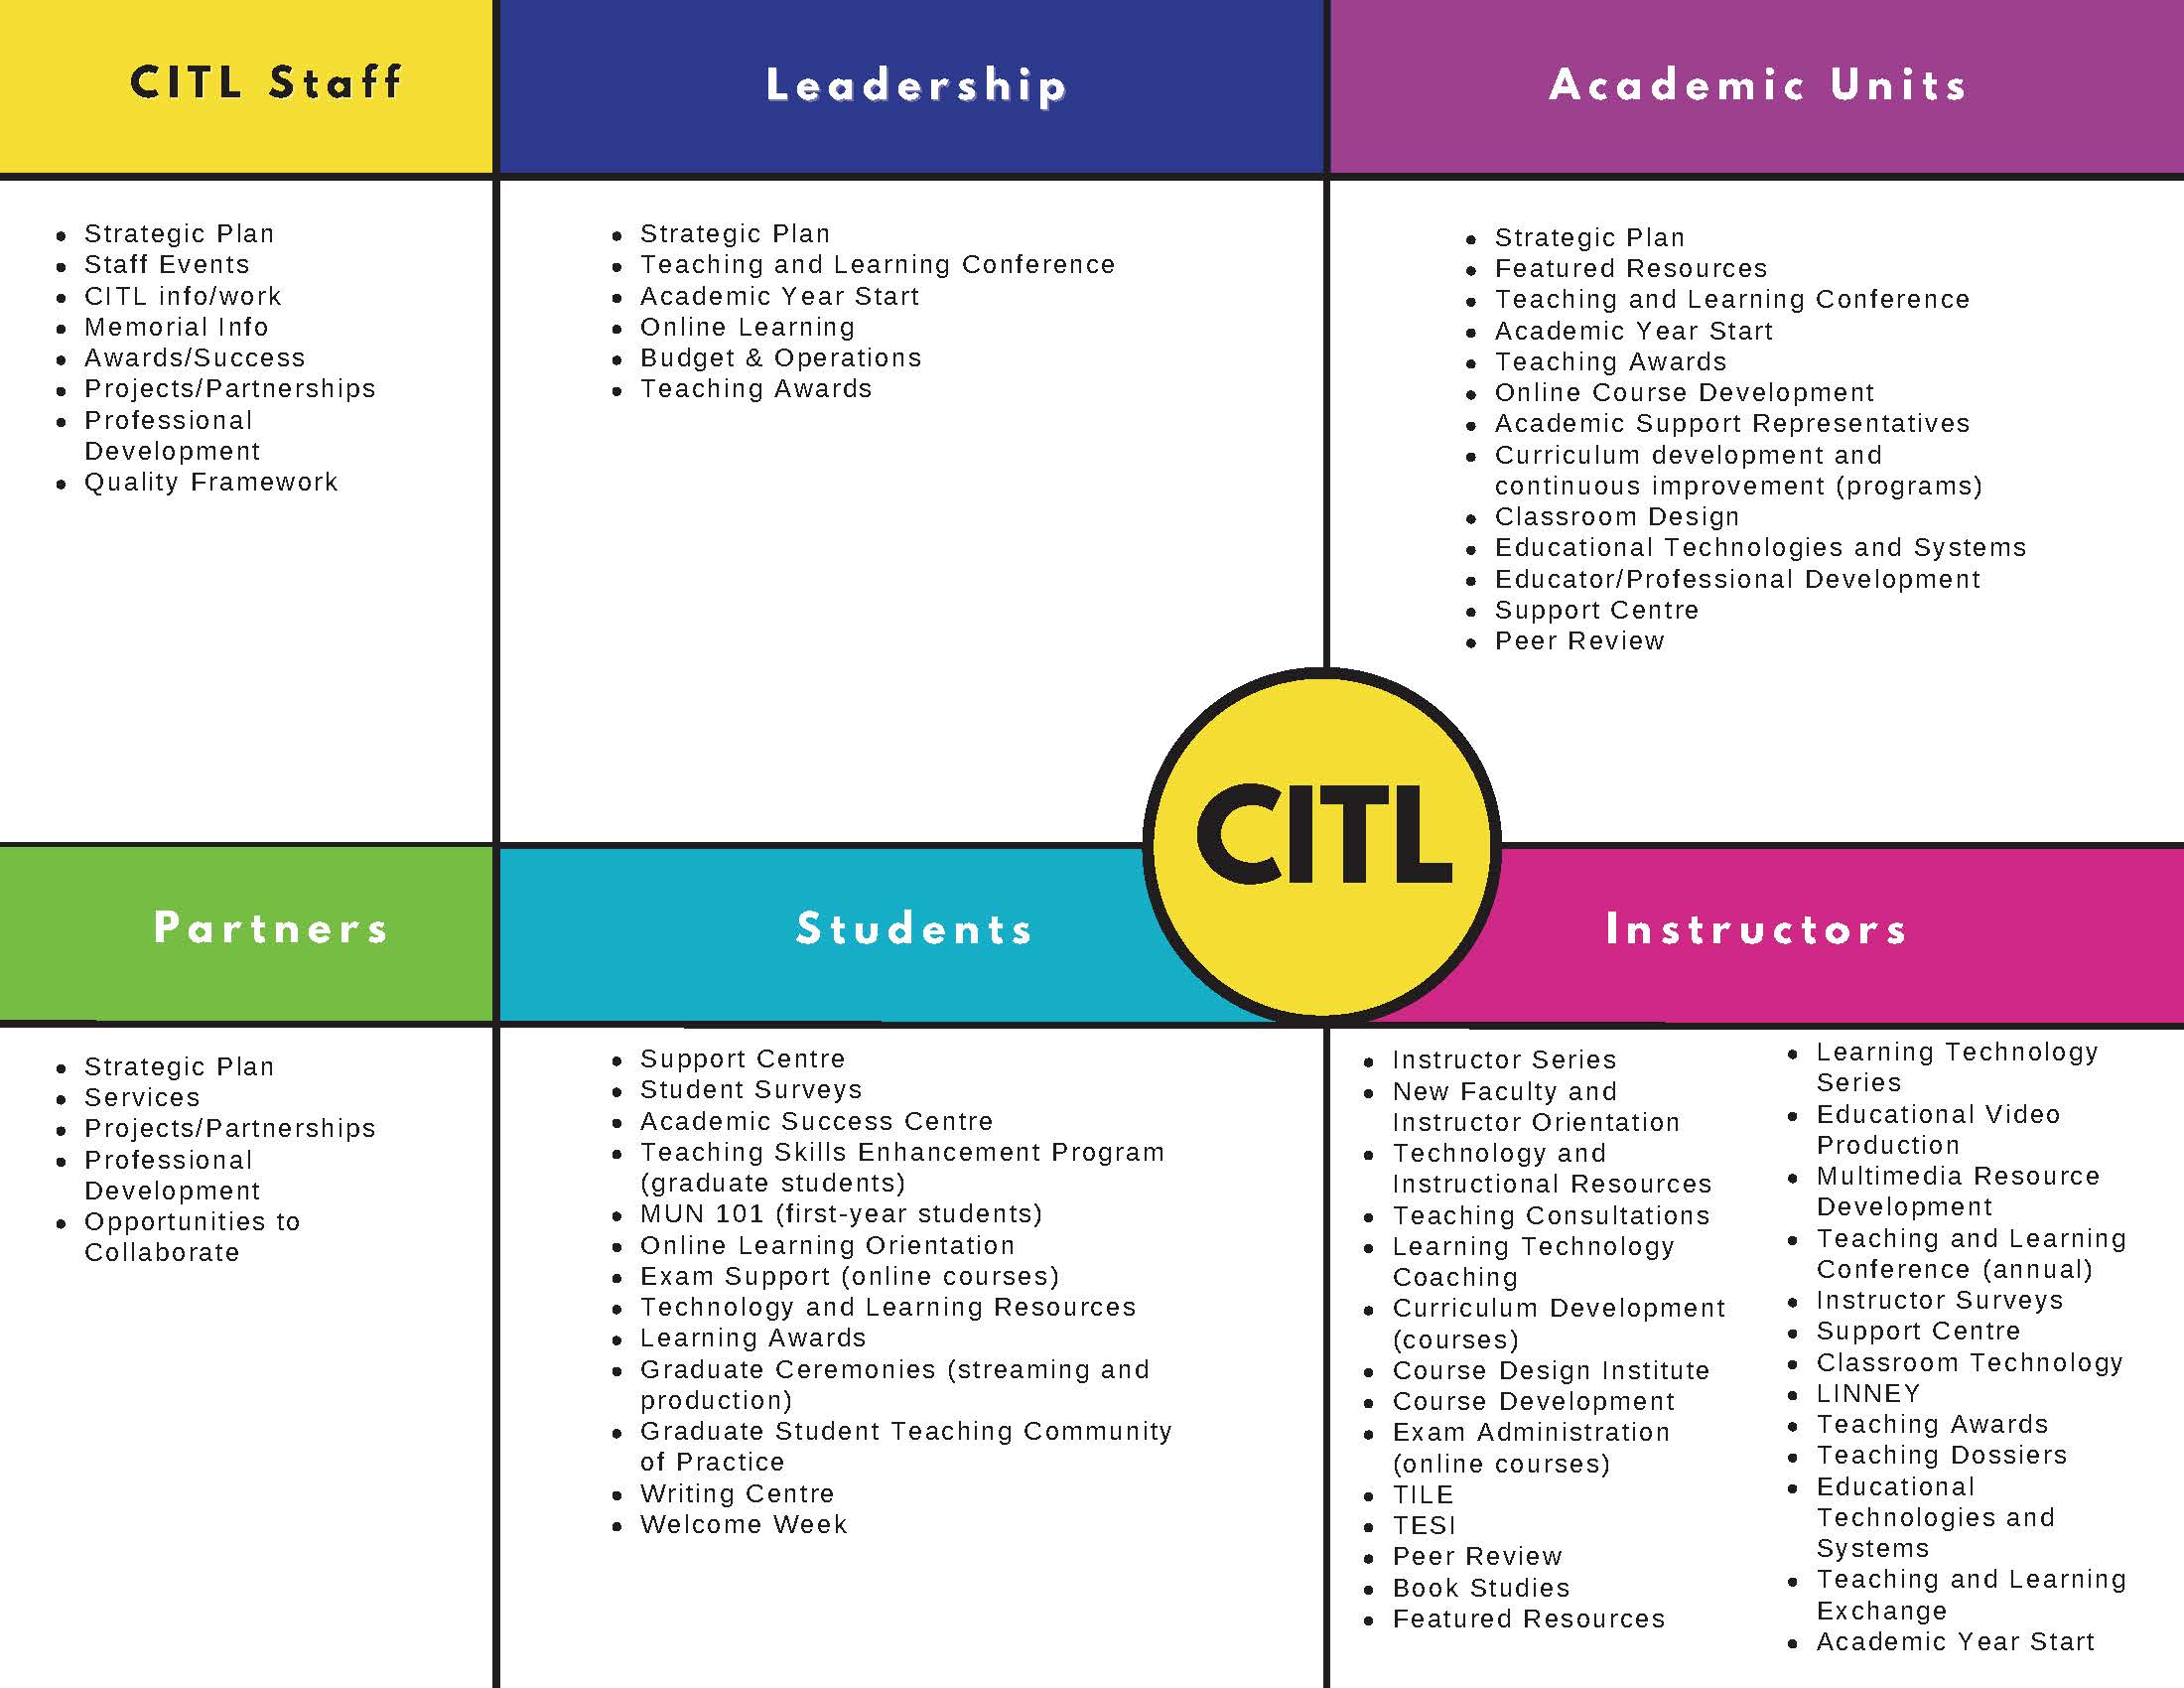 A grid is displayed of six categories of CITL's audiences: leadership groups, academic units, instructors, students, partners and CITL staff. Underneath each audience is a list of relevant CITL information and services.